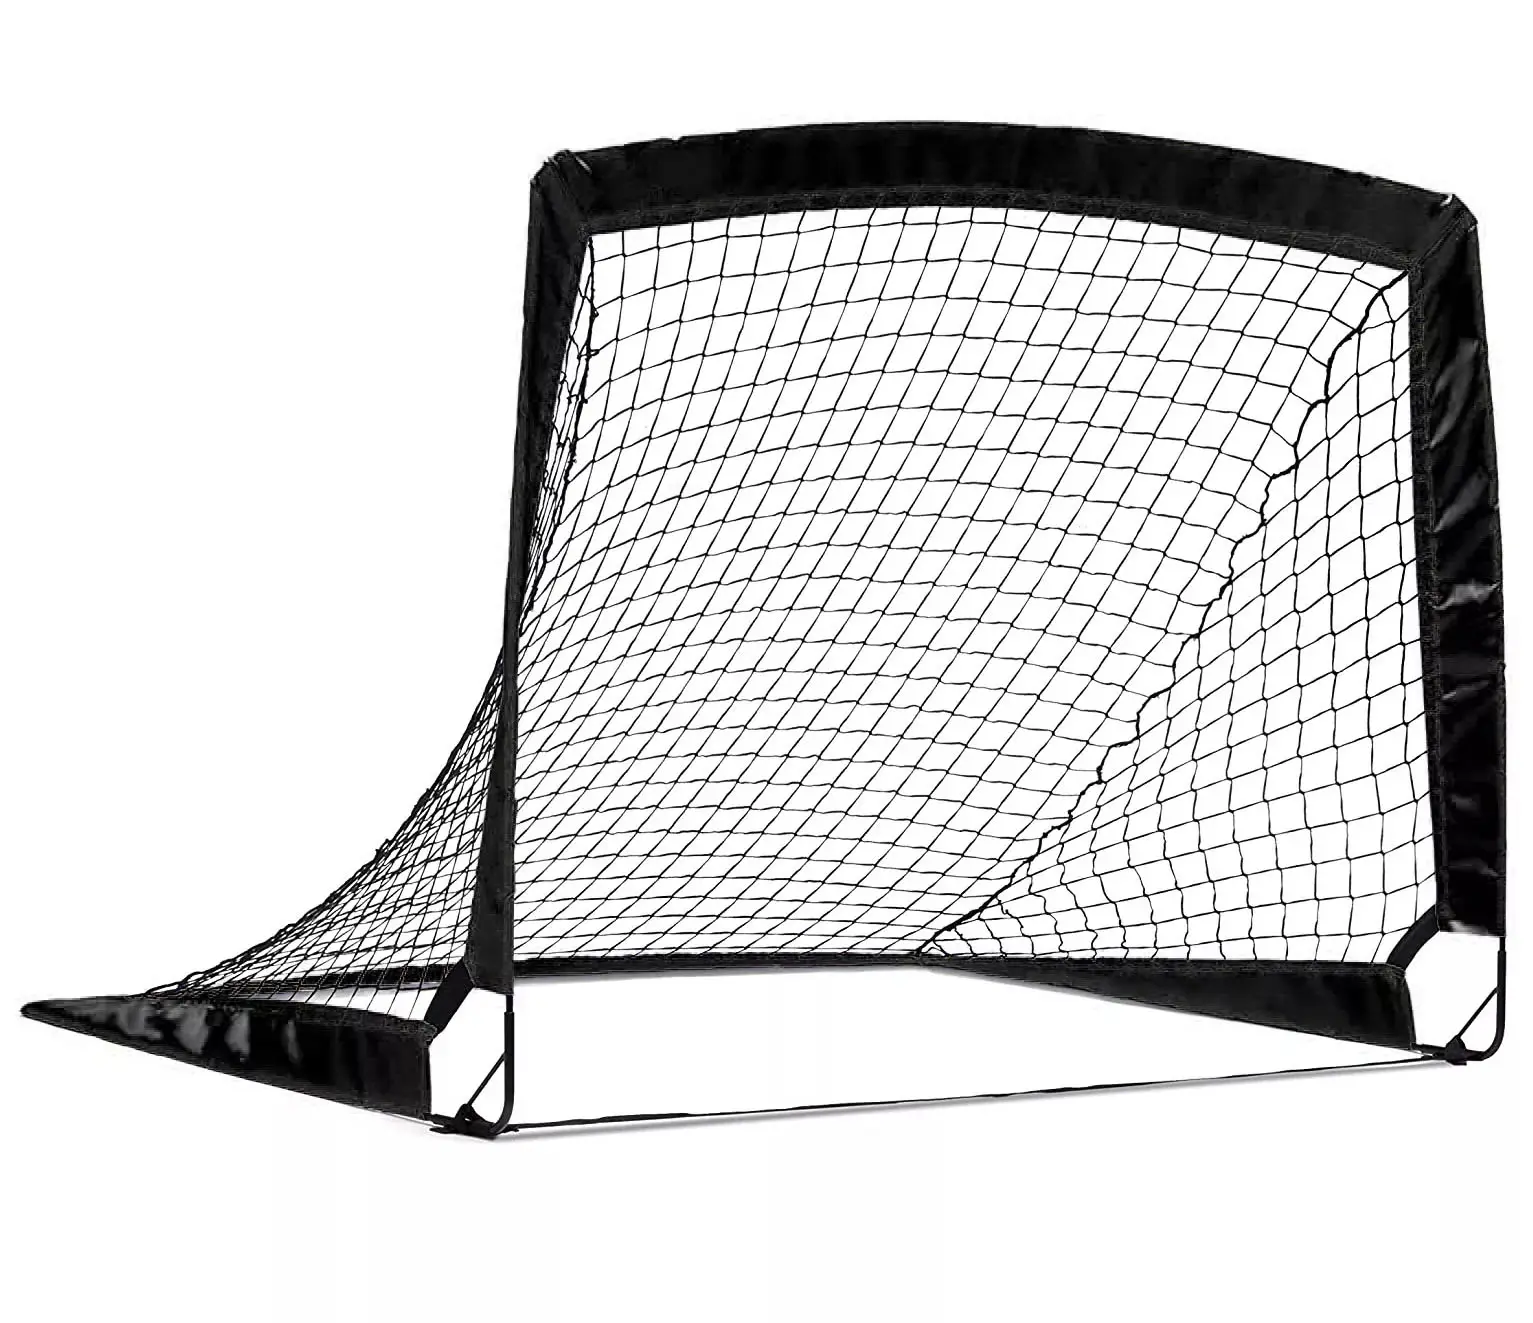 Soccer Goal Factory High Quality Selling Pop-up Soccer Goal Customized Durable Large Size Soccer Goal